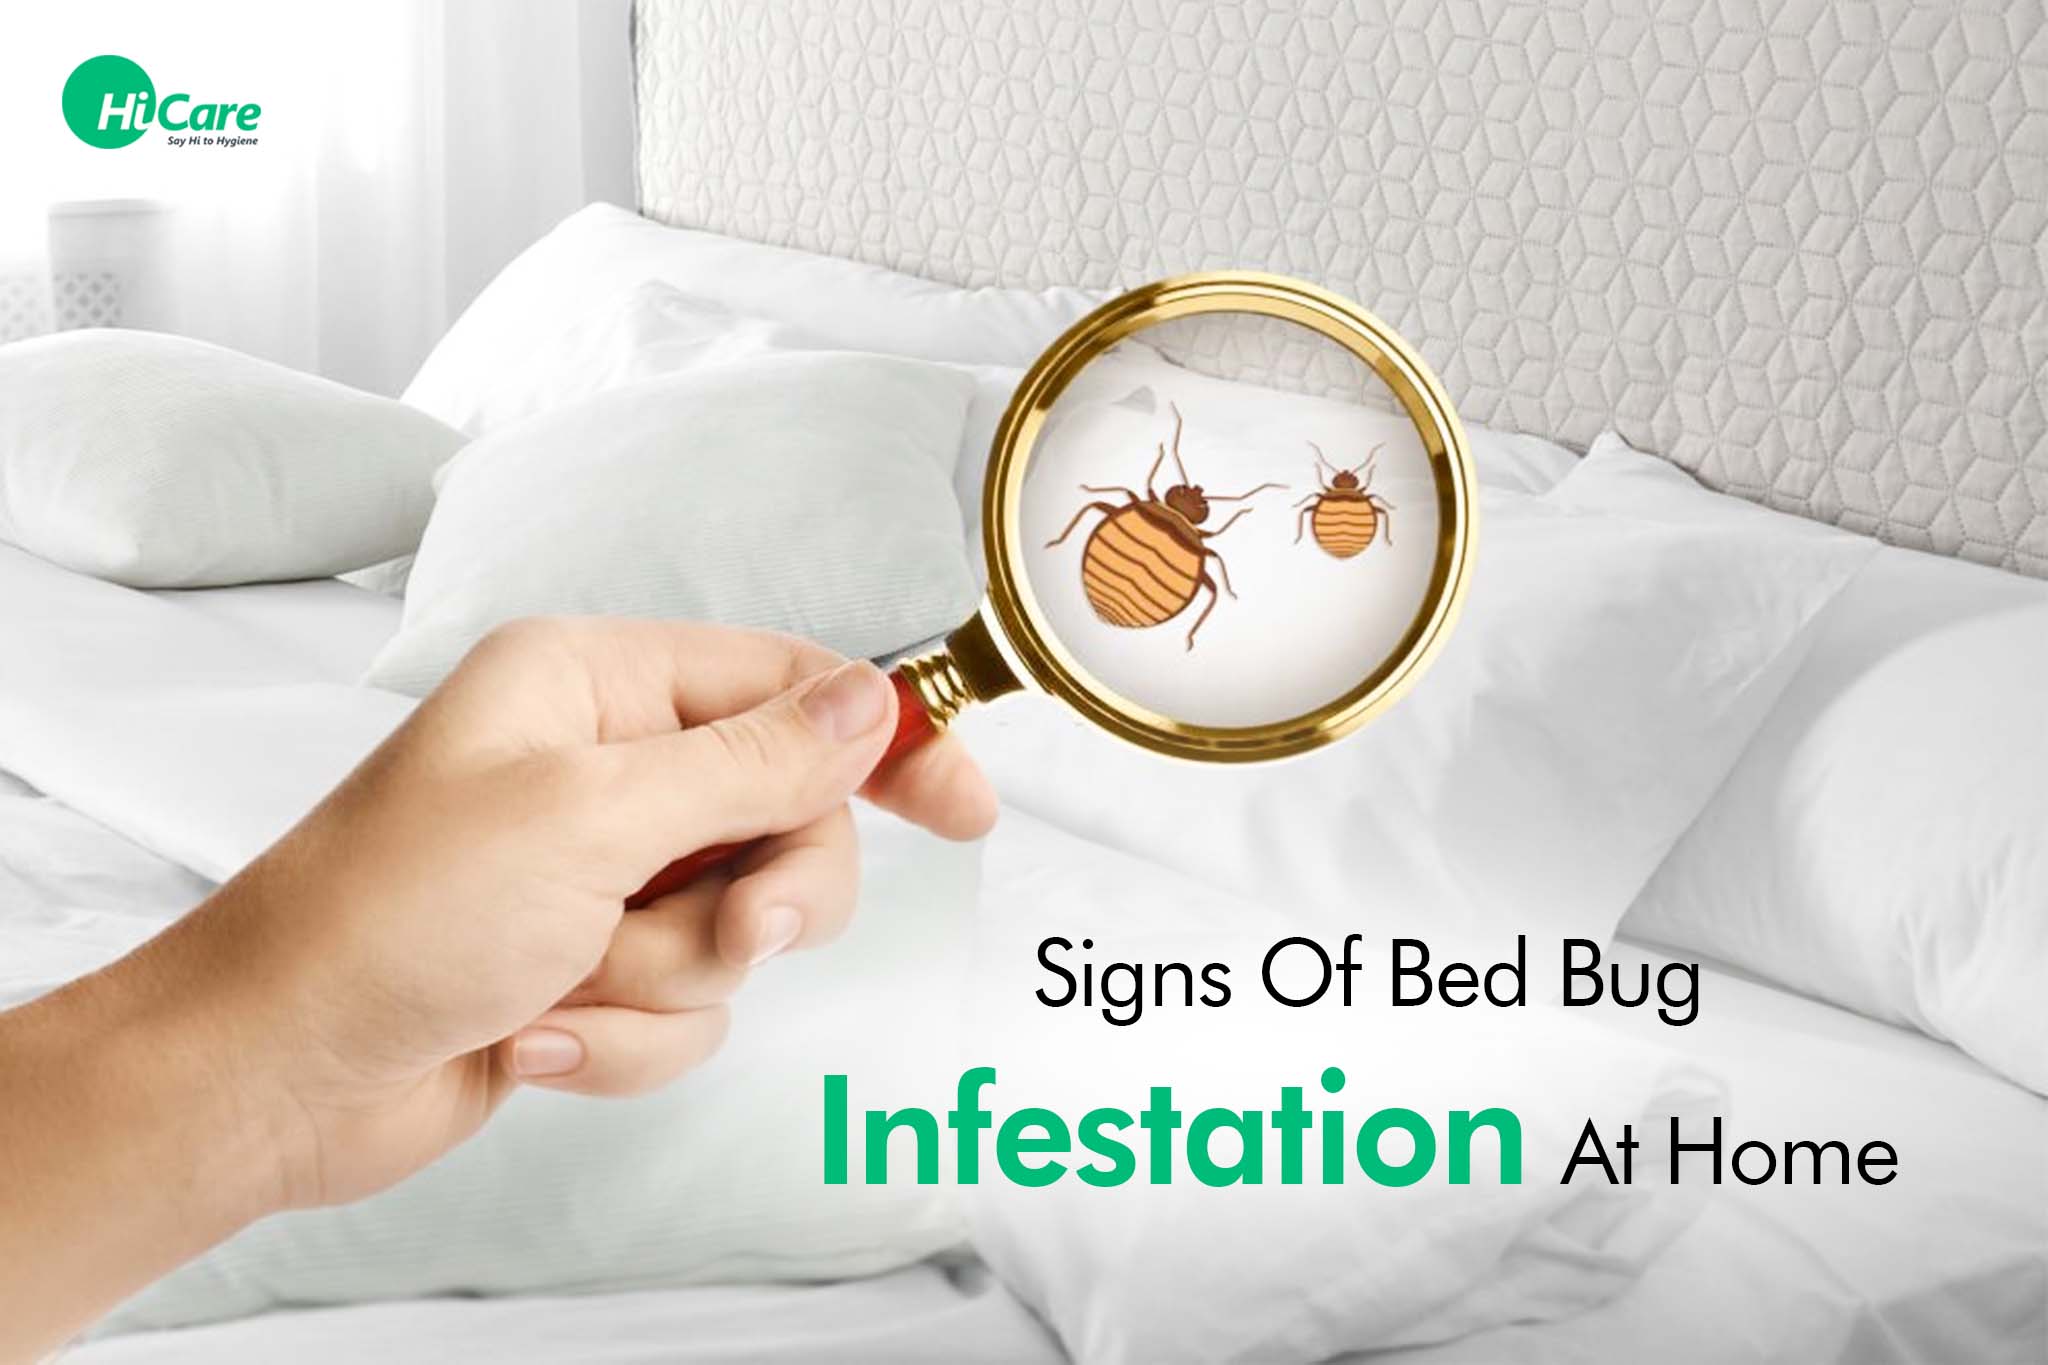 8 Signs Of Bed Bug Infestation At Home | HiCare